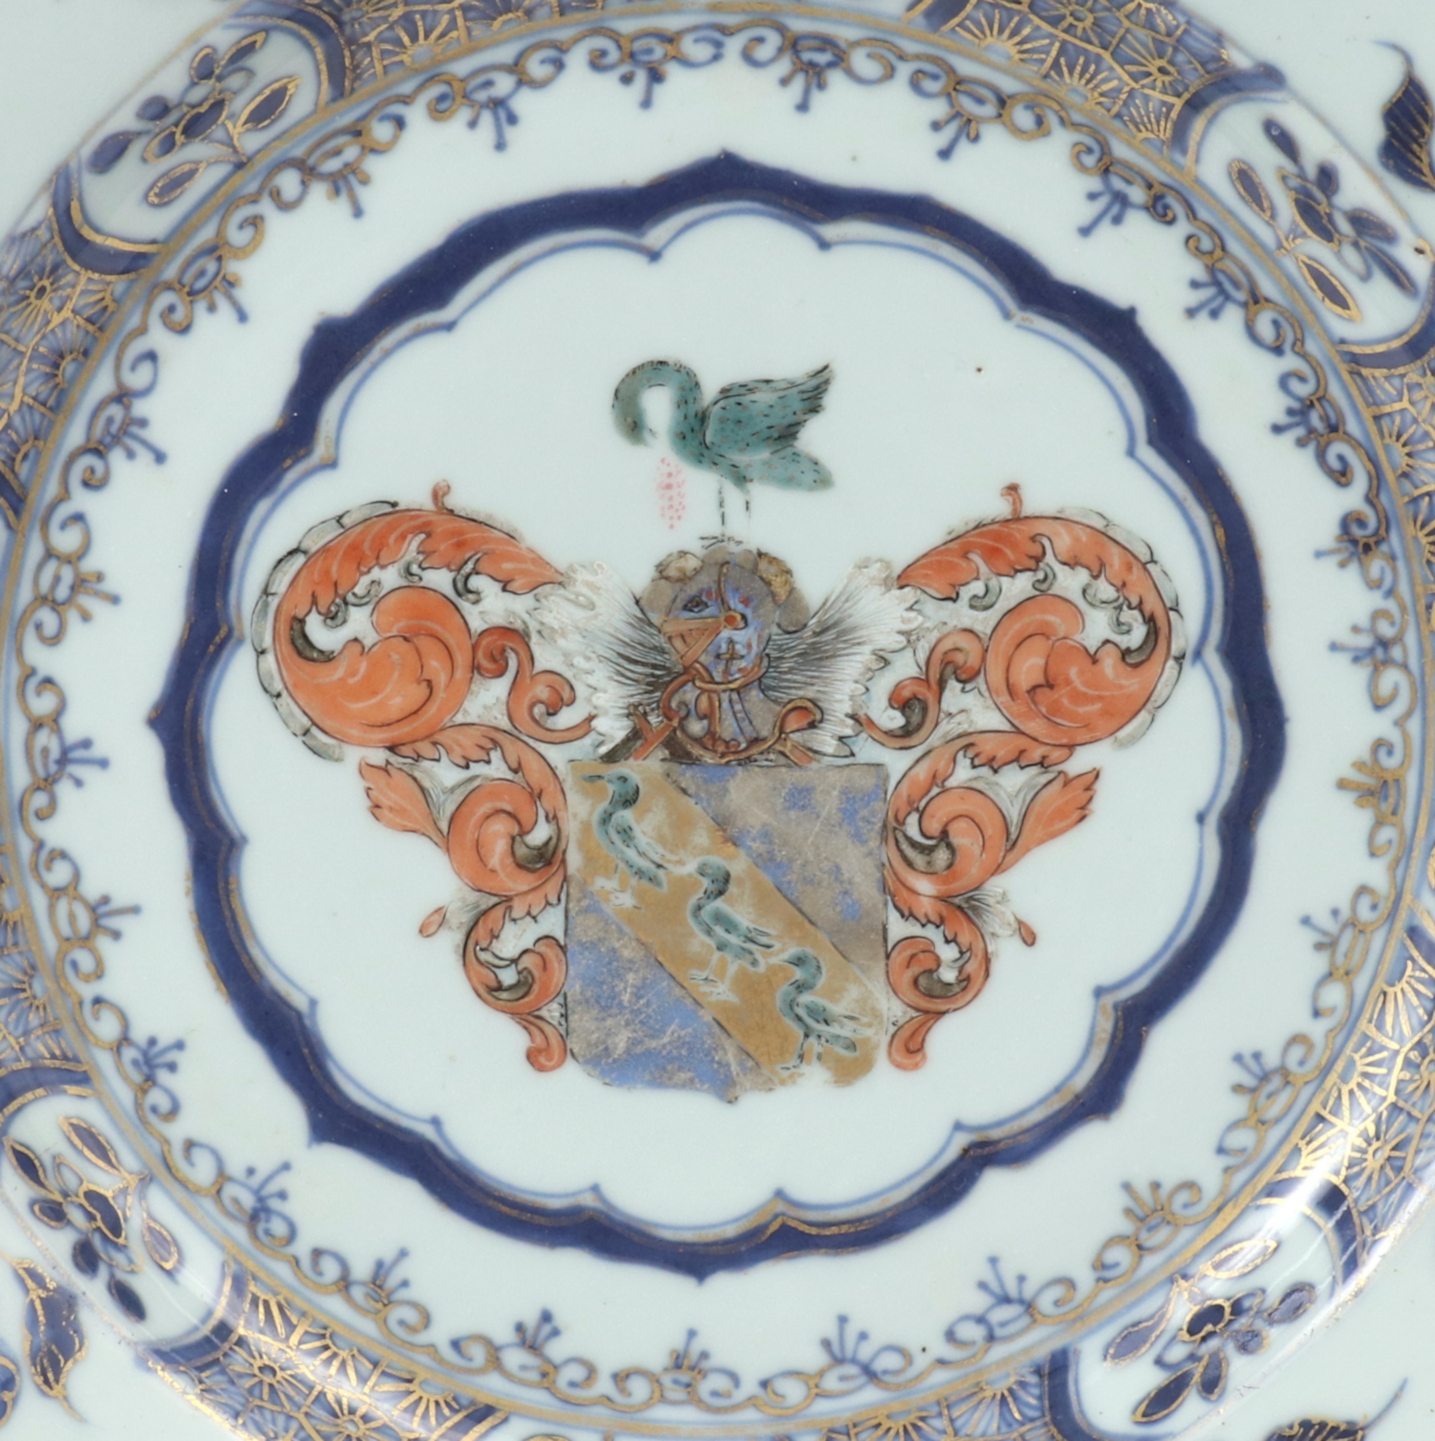 Chinese Export Armorial Plate, c. 1730